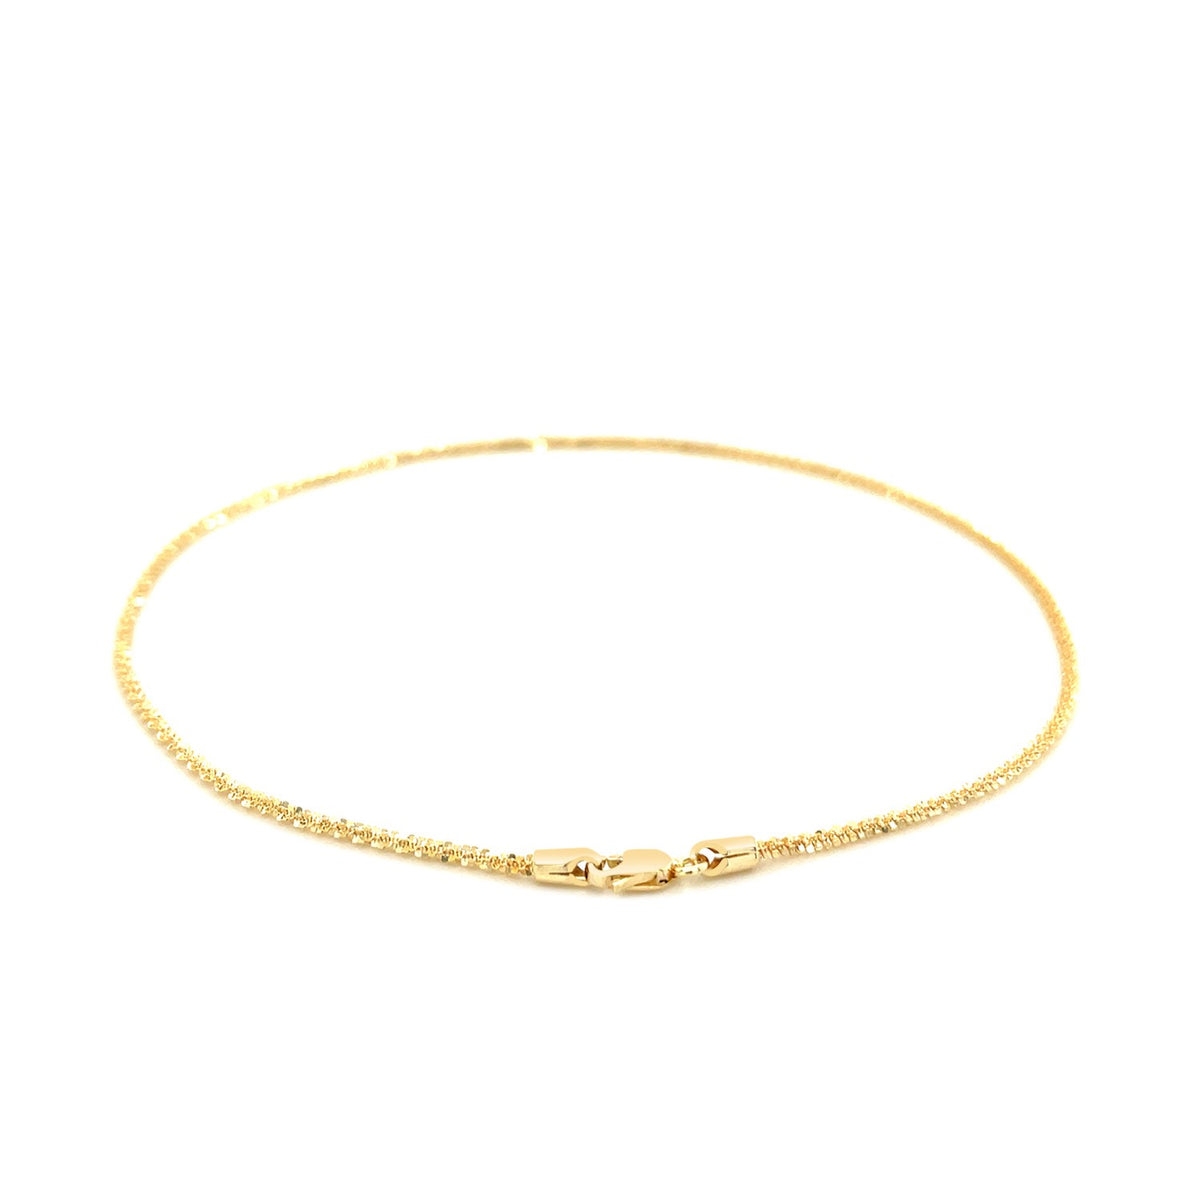 Sparkle Anklet - 10k Yellow Gold 1.5mm